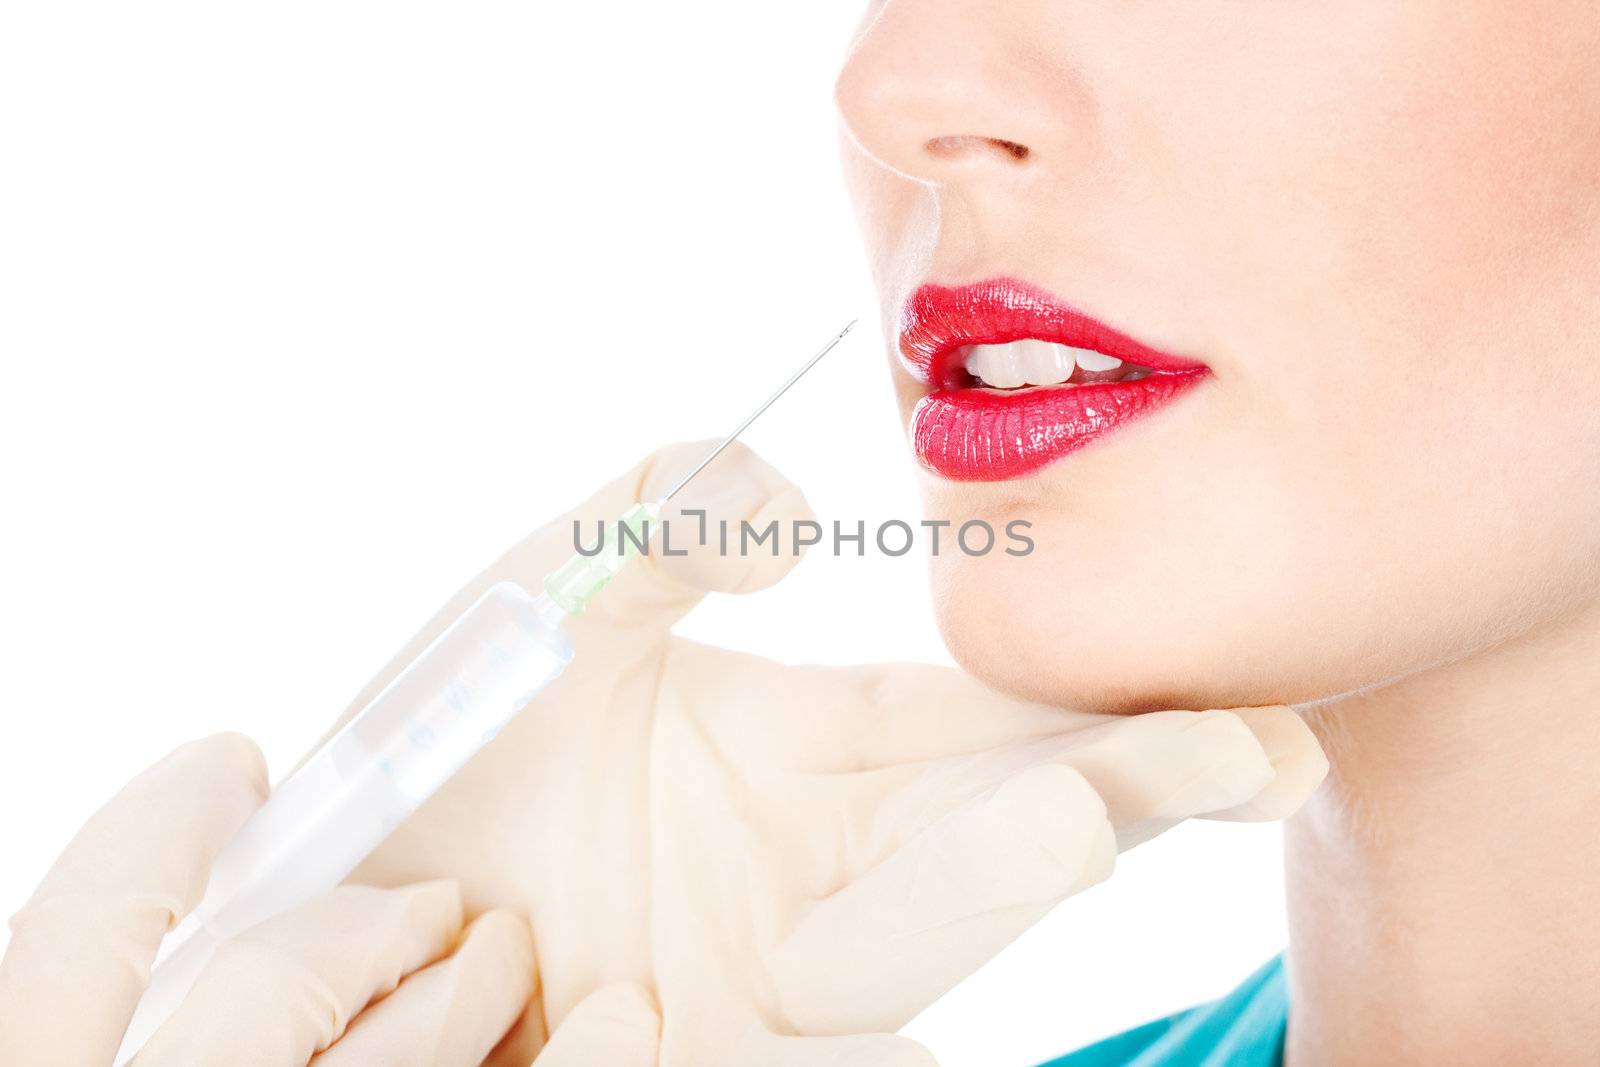 Syringe and lips by imarin